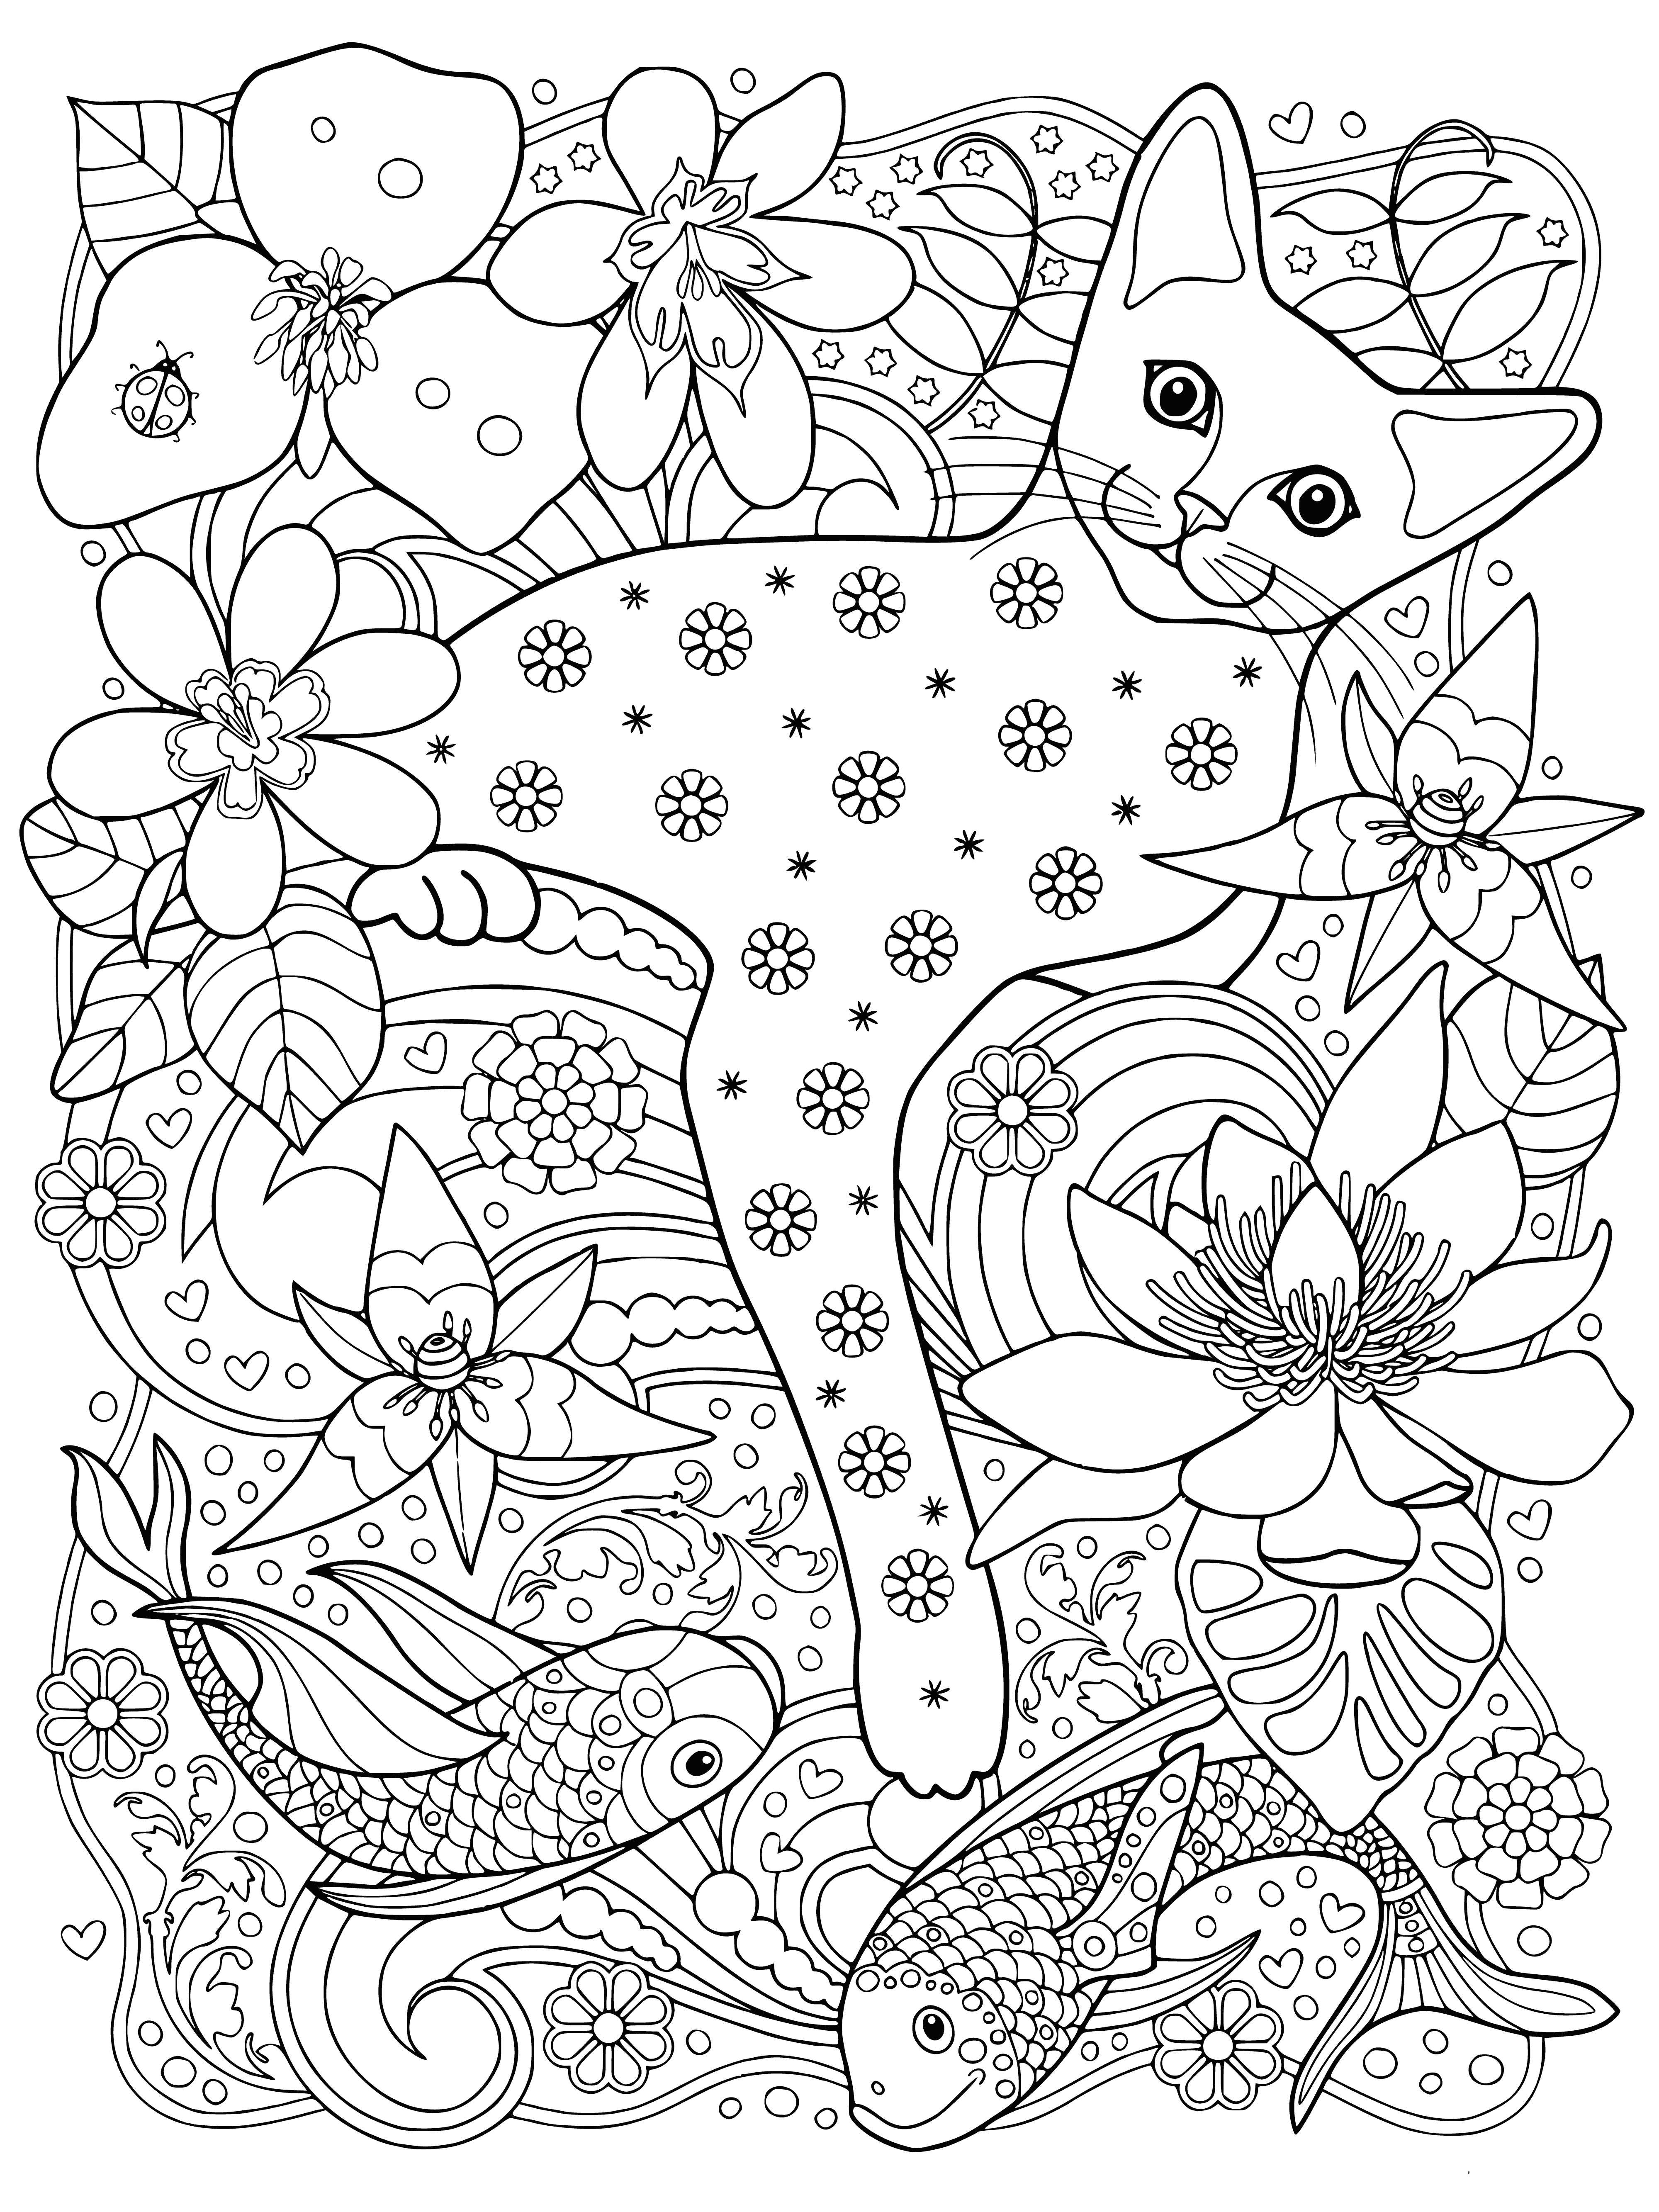 Cat with fishes coloring page